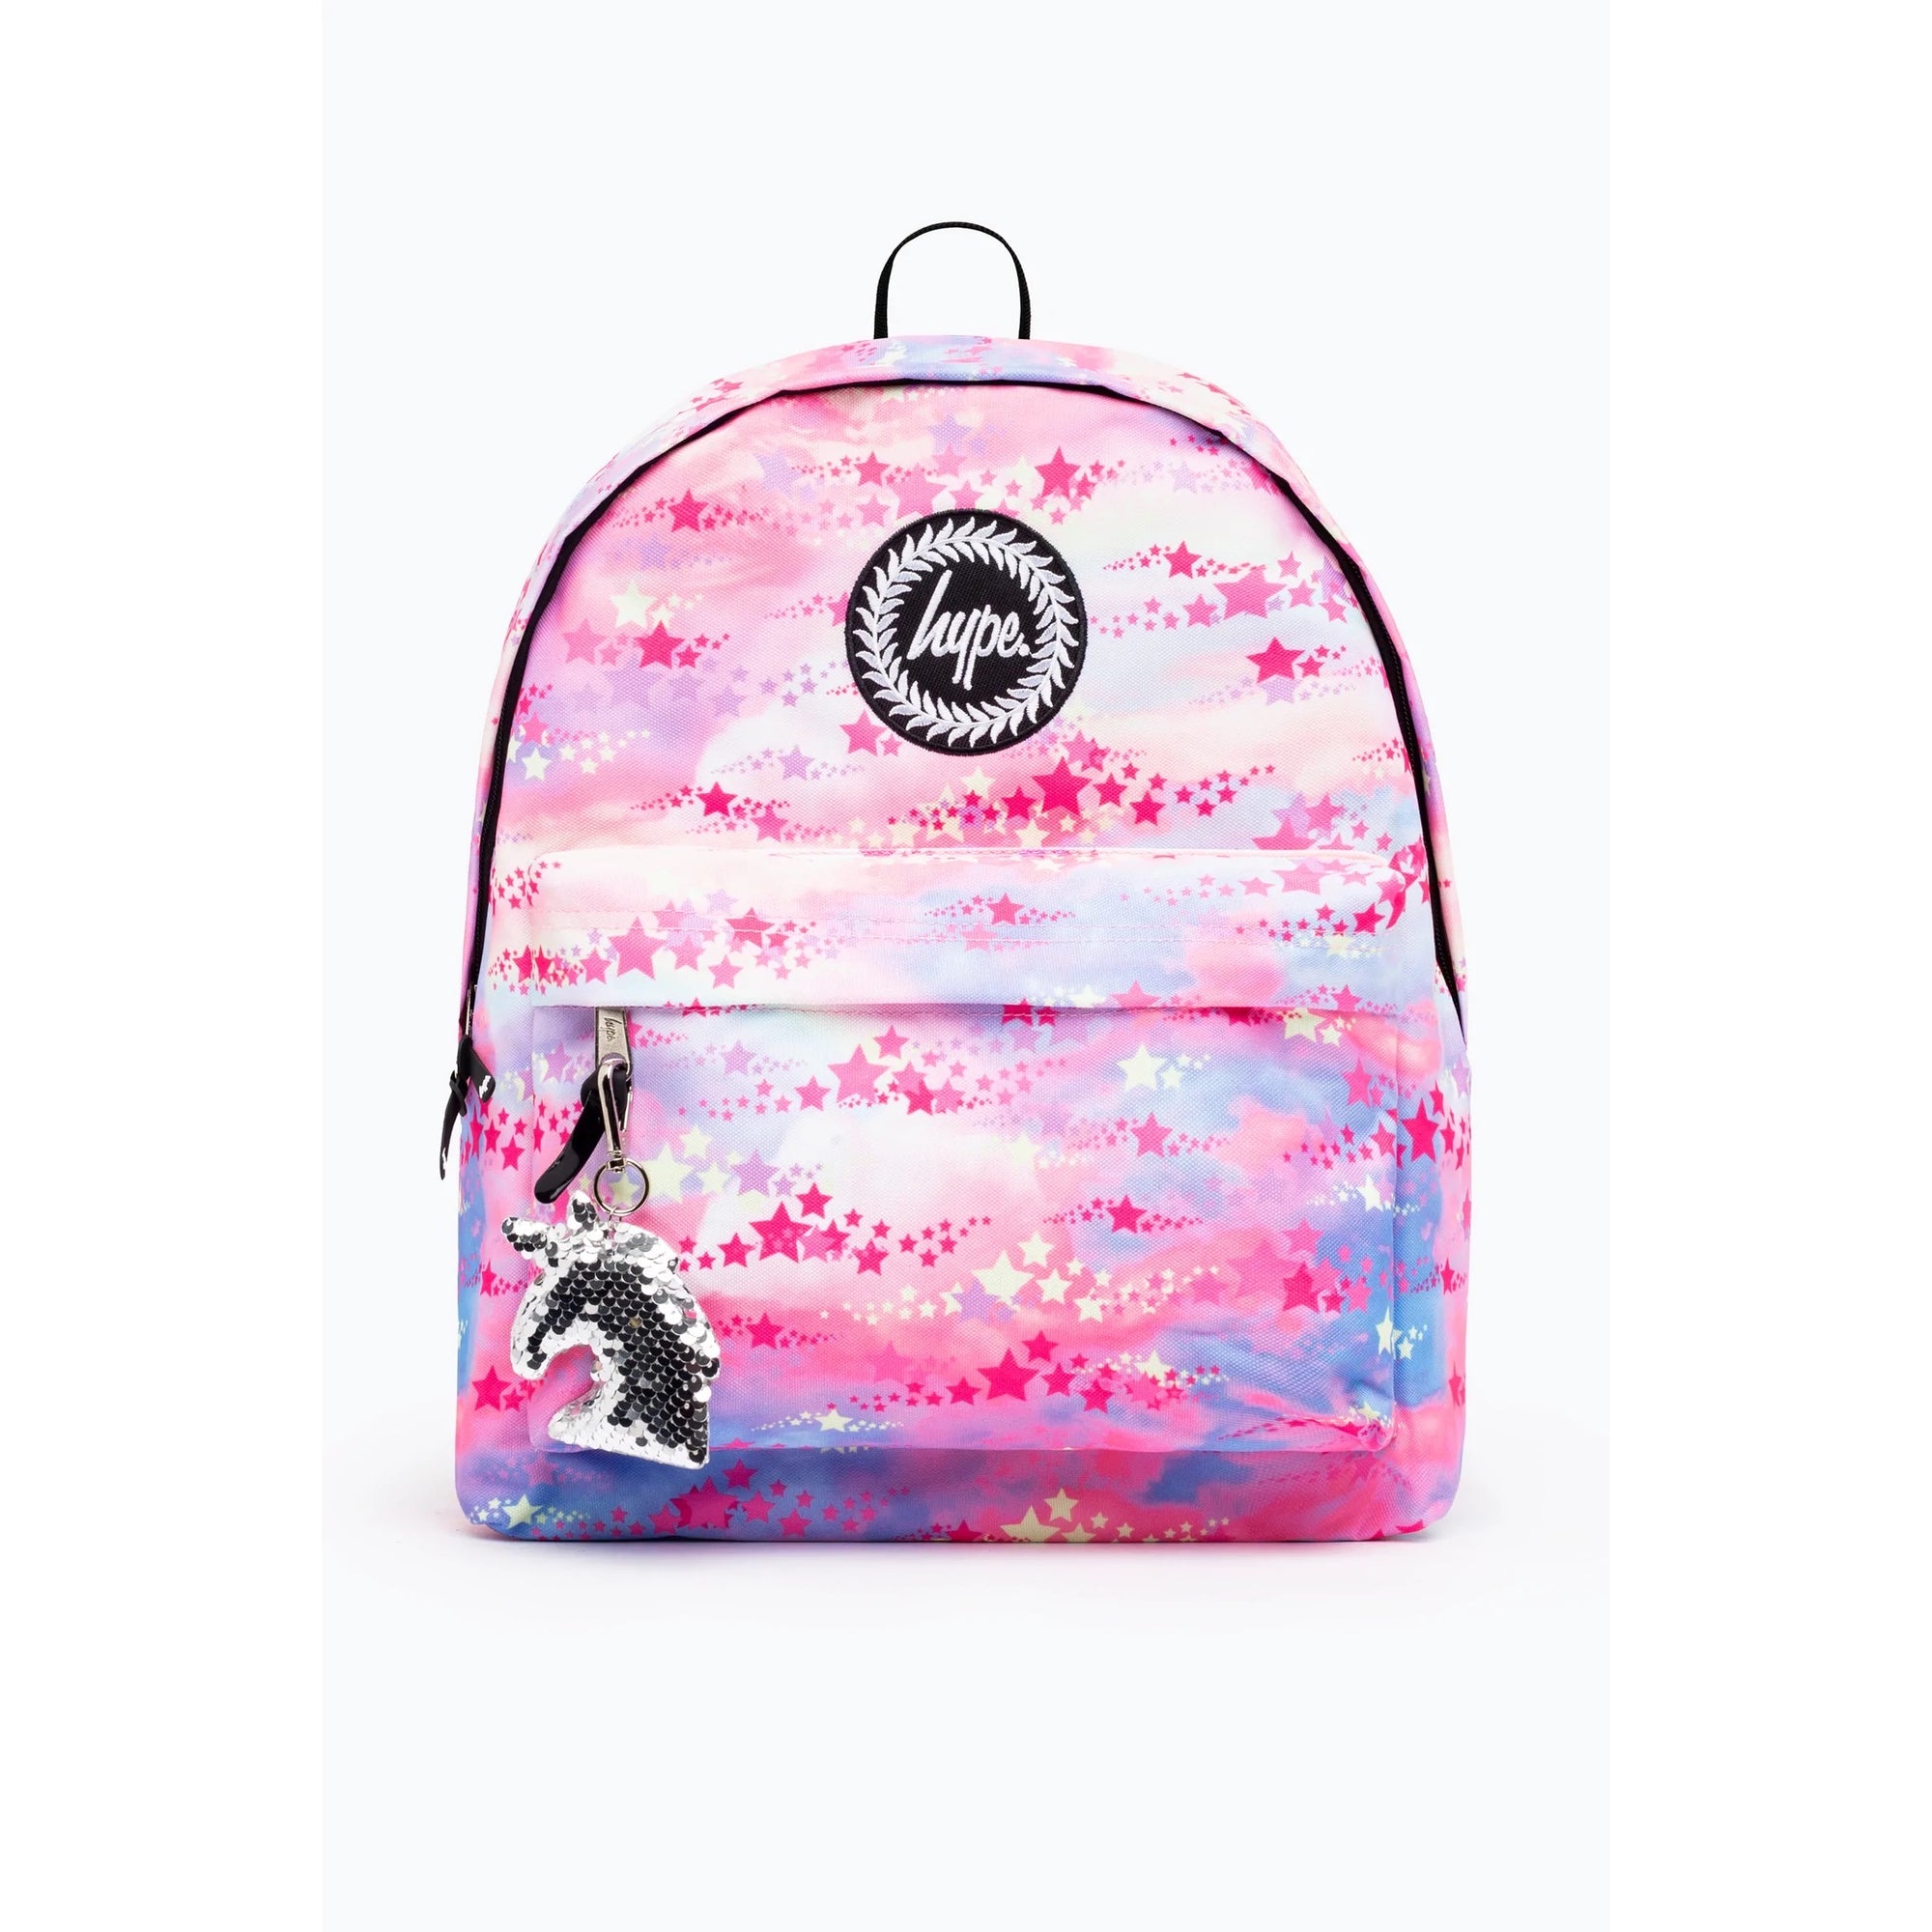 Hype Rainbow Star Backpack Twlg-768 Accessories ONE SIZE / Pink